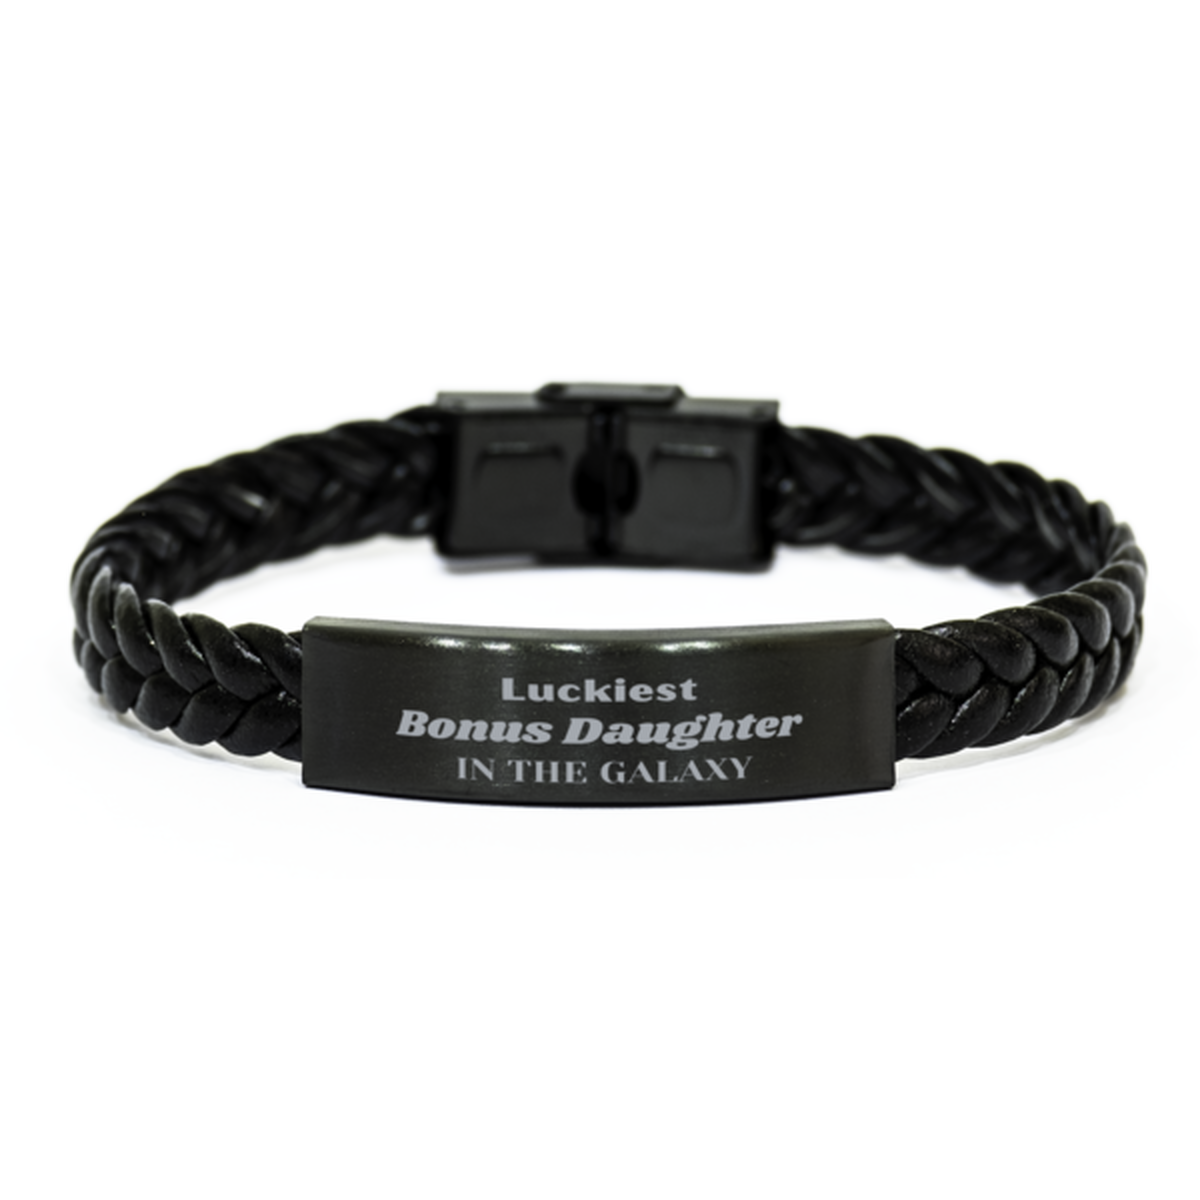 Luckiest Bonus Daughter in the Galaxy, To My Bonus Daughter Engraved Gifts, Christmas Bonus Daughter Braided Leather Bracelet Gifts, X-mas Birthday Unique Gifts For Bonus Daughter Men Women